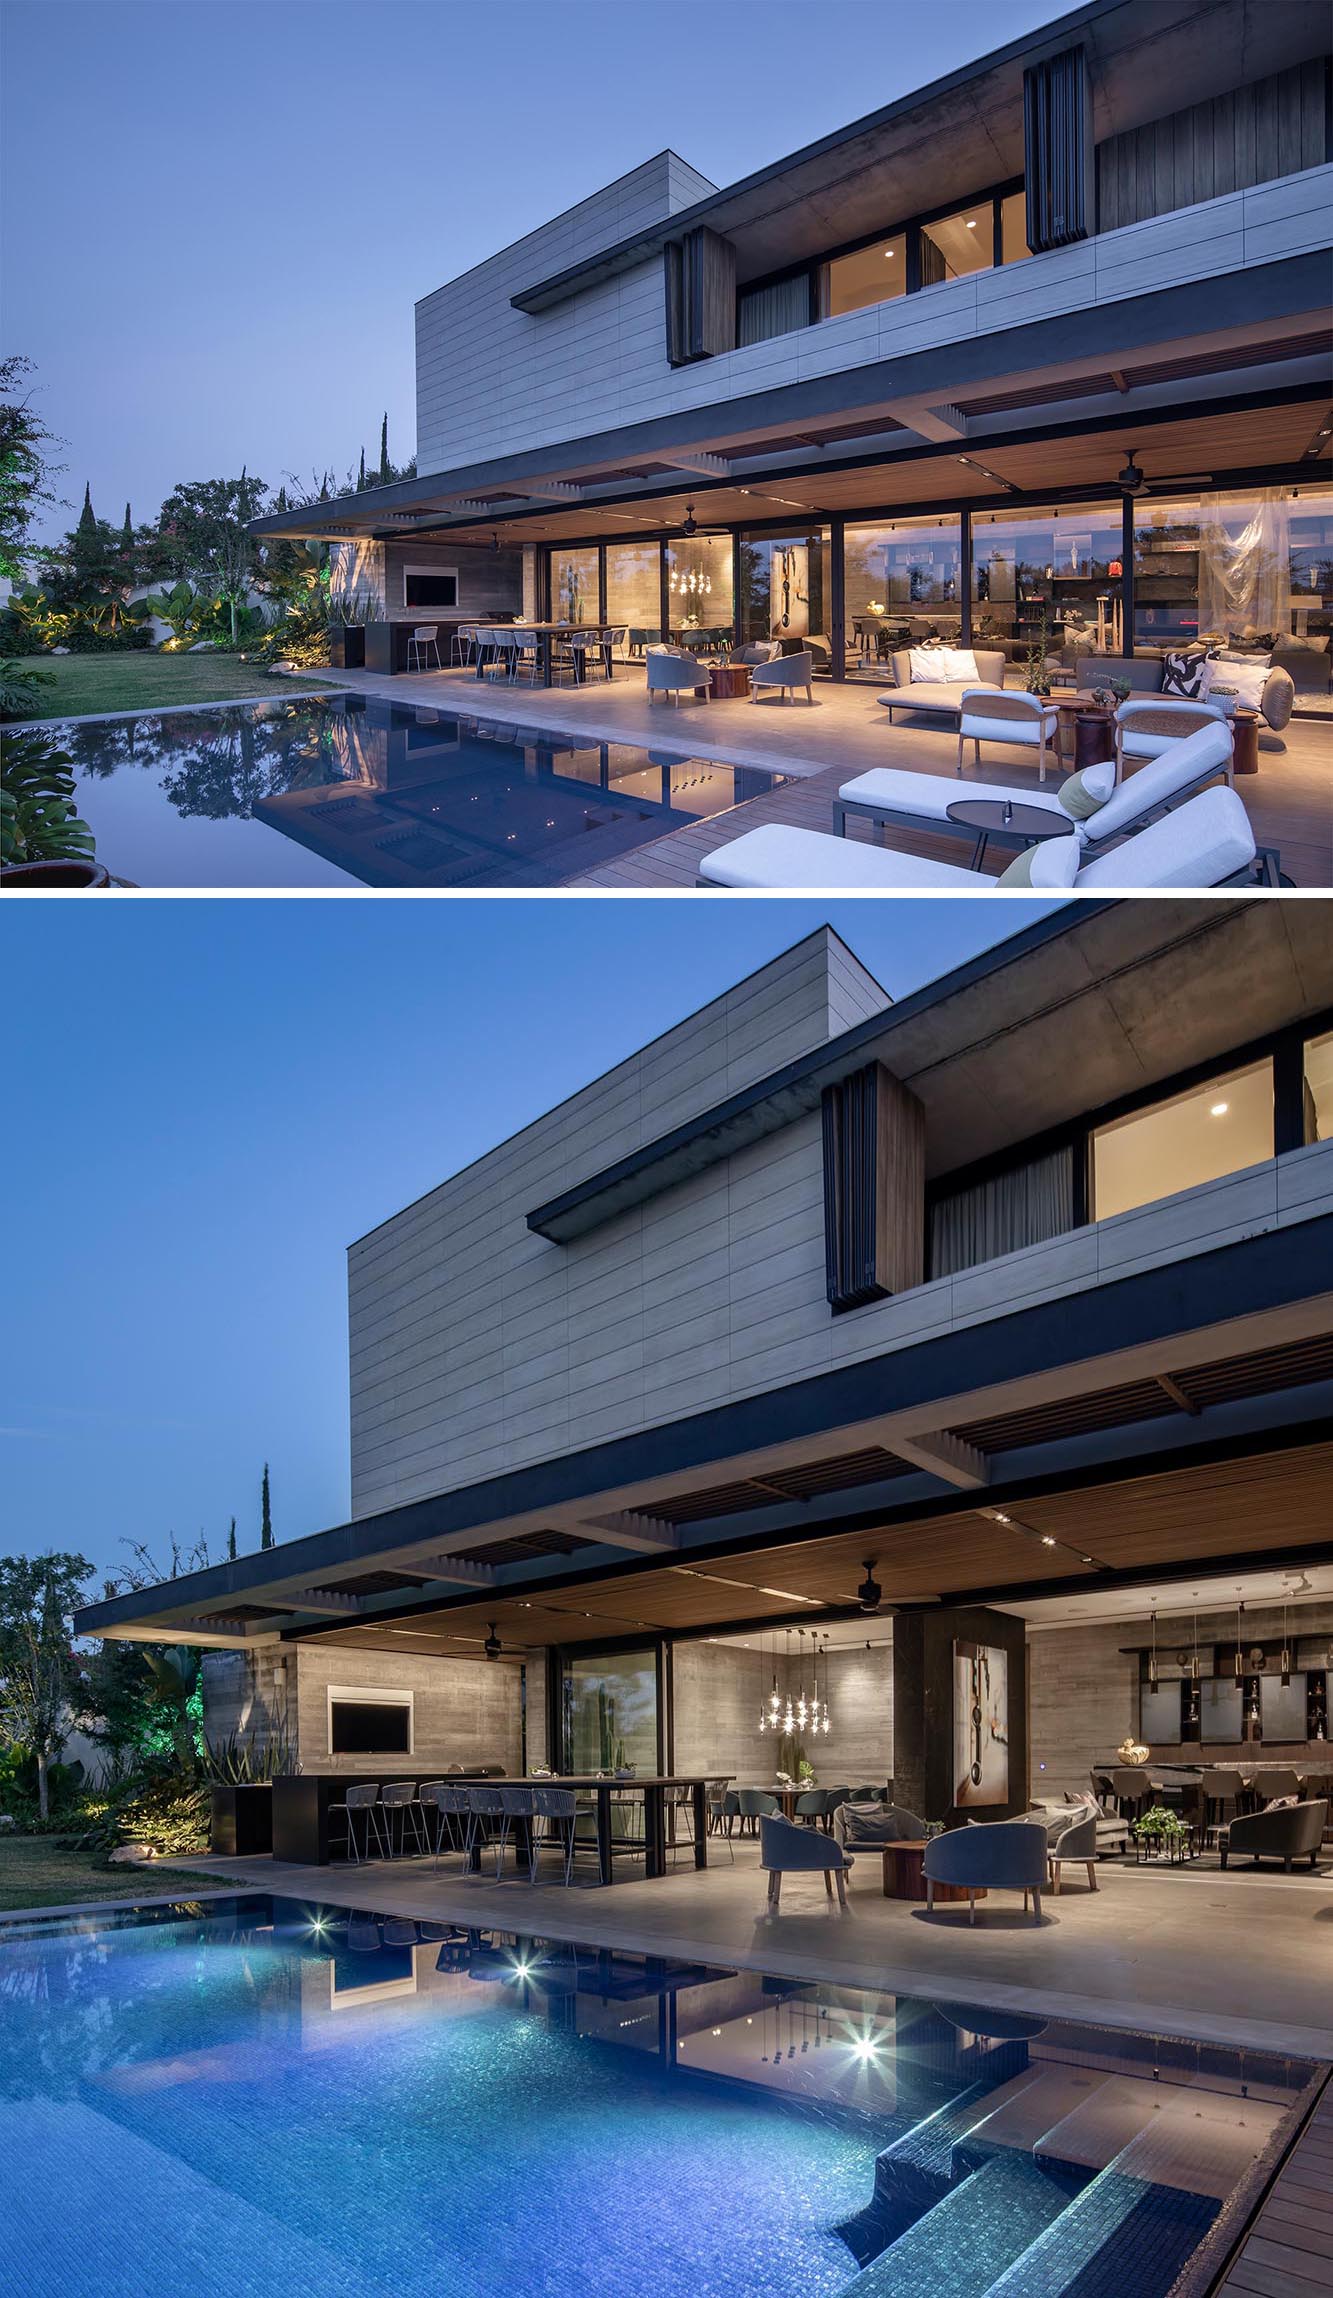 A modern concrete house with a swimming pool and expansive outdoor entertaining areas.